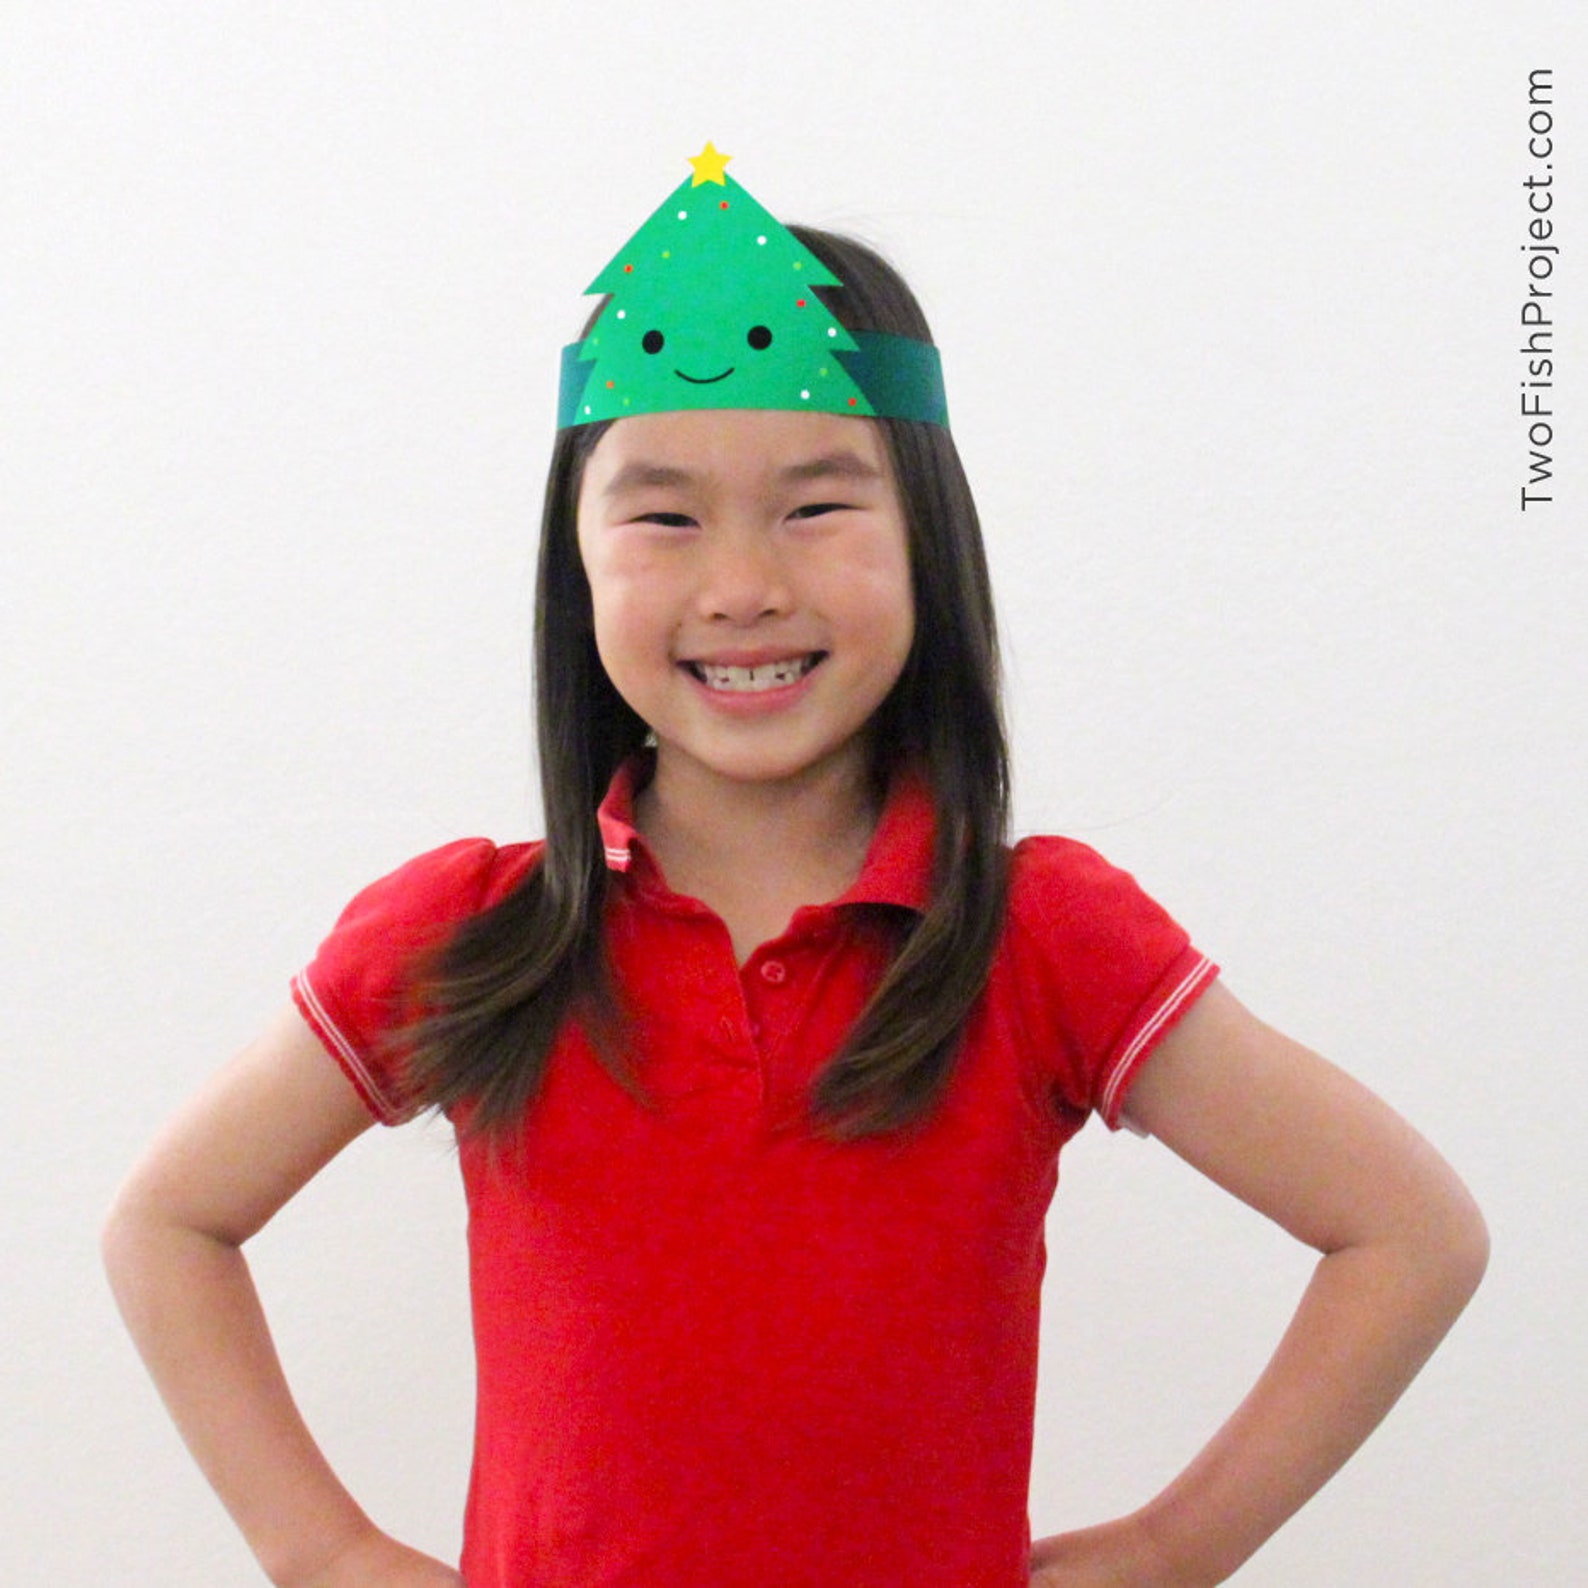 elf-hat-paper-craft-christmas-party-hats-school-play-download-now-etsy